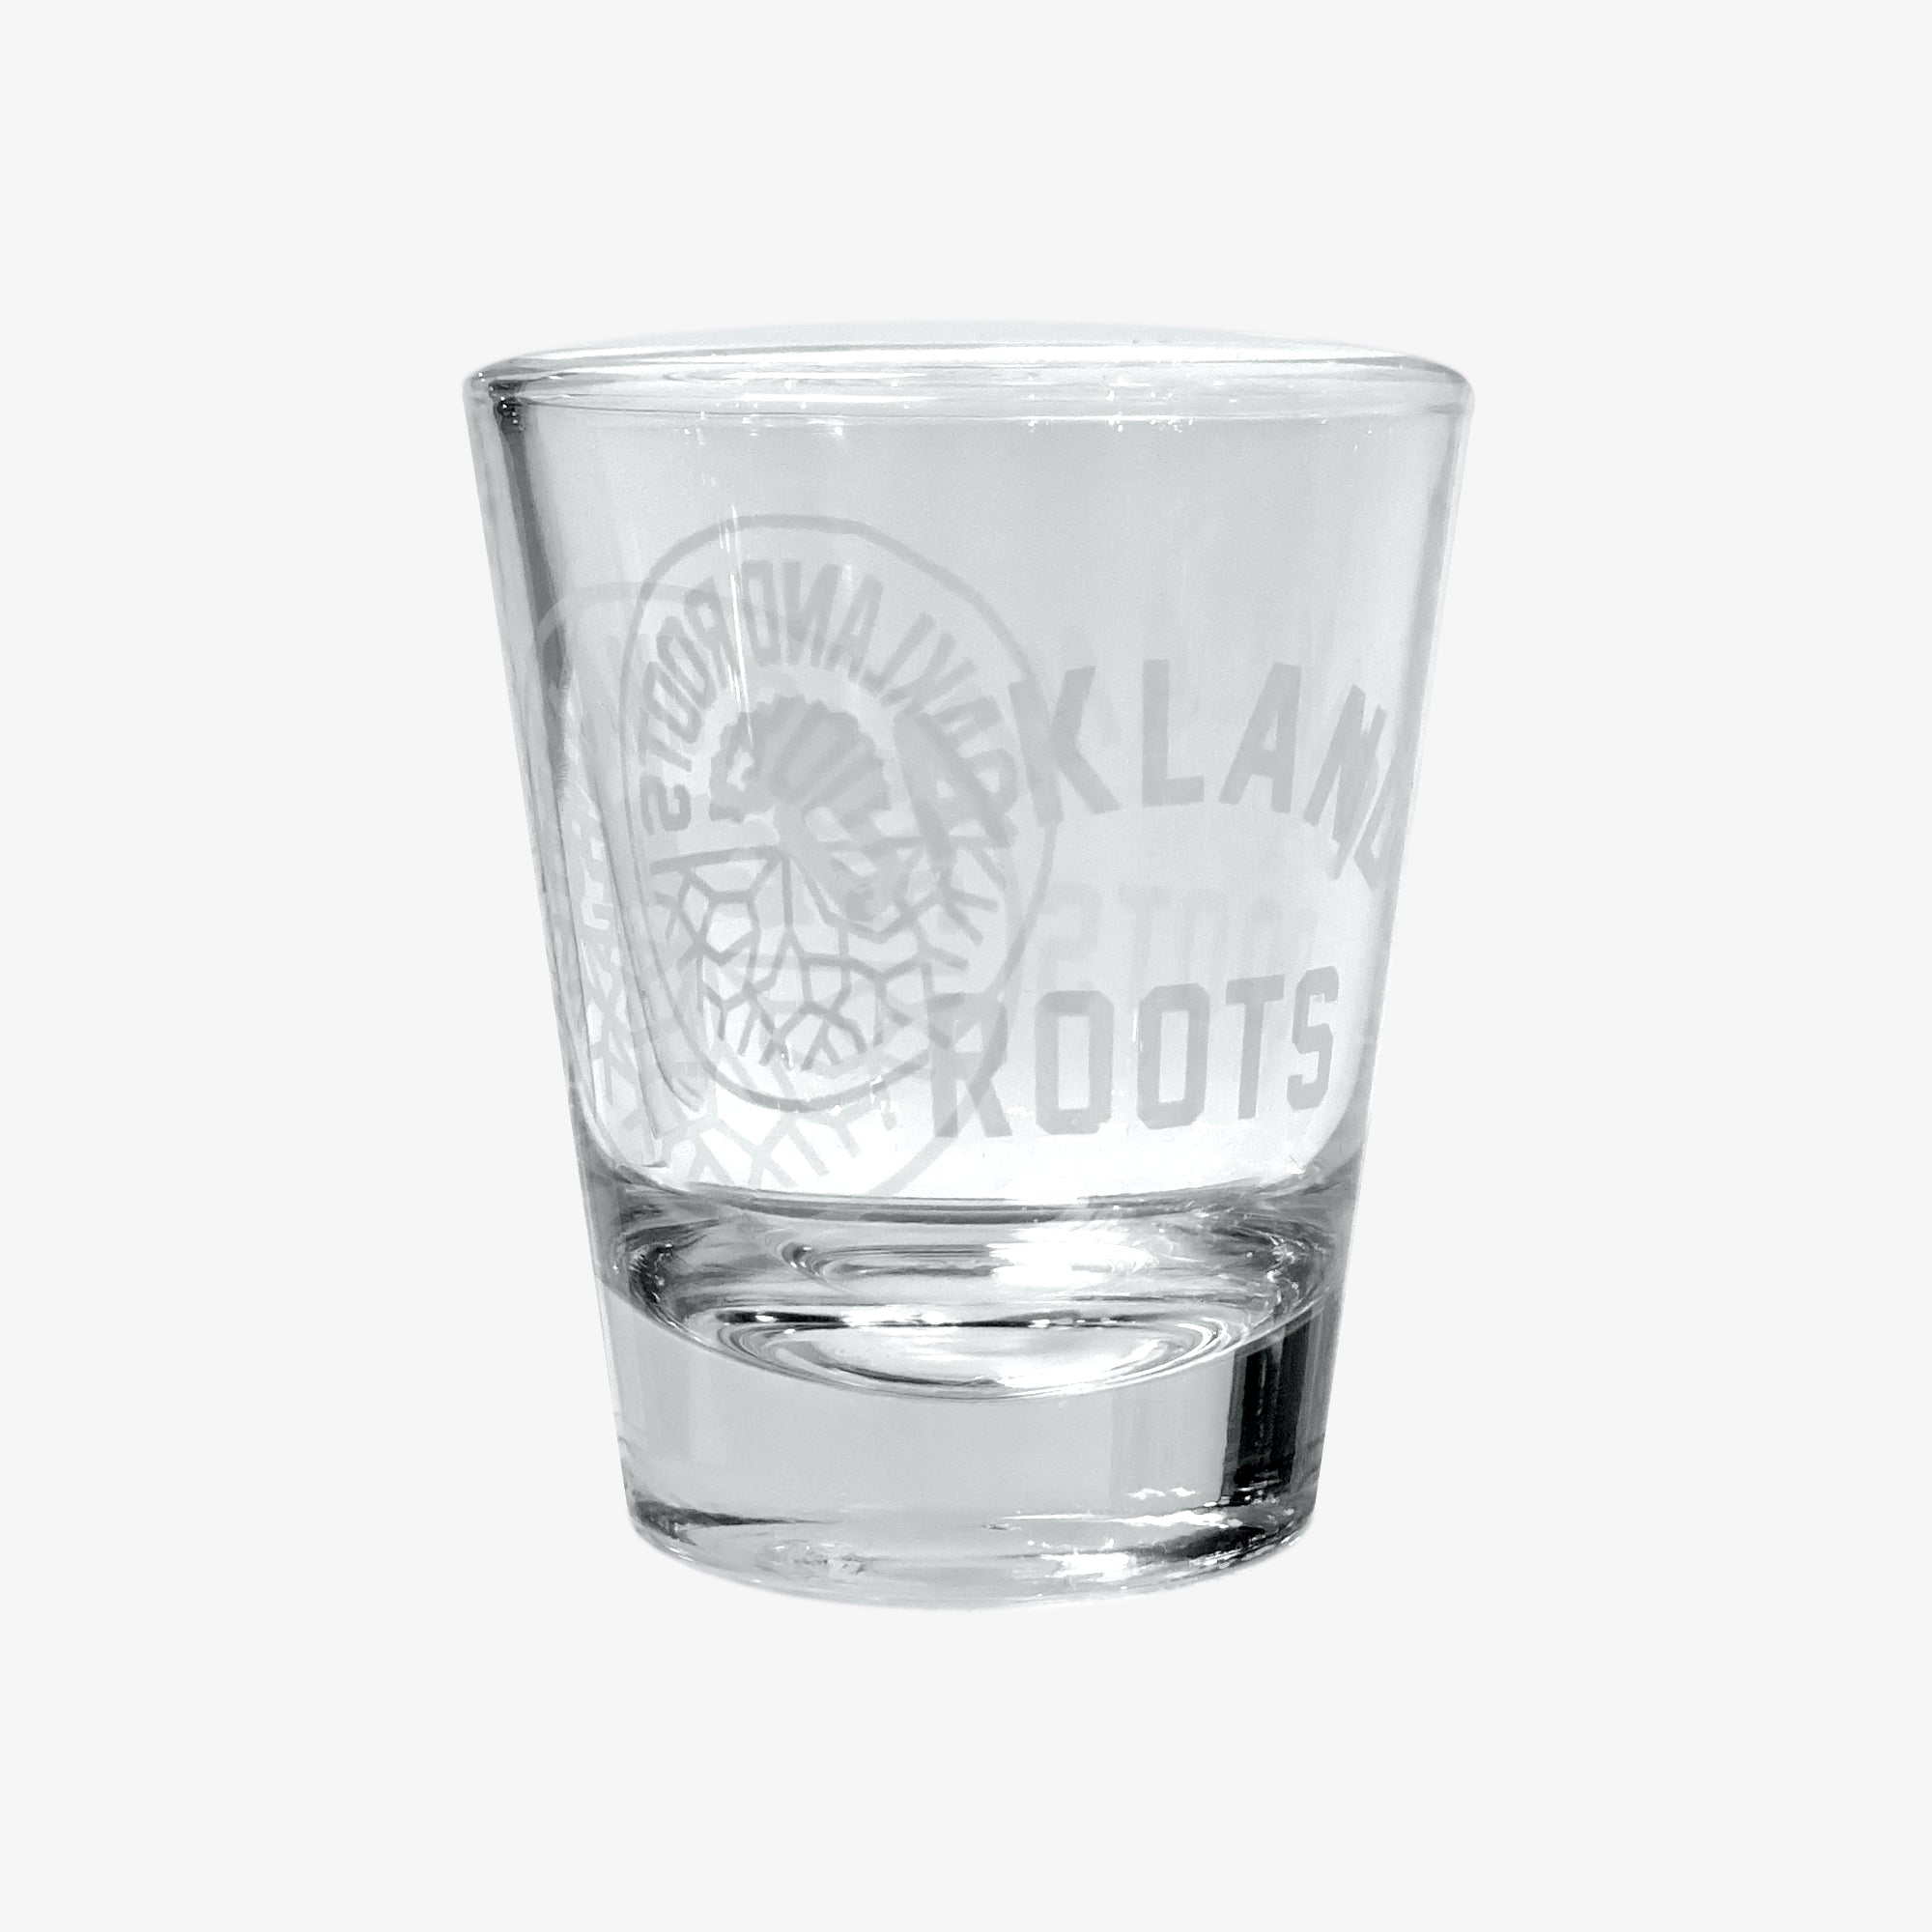 Liquor shot glass (1.75 oz) with translucent white Oakland Roots logo crest and OAKLAND ROOTS wordmark.